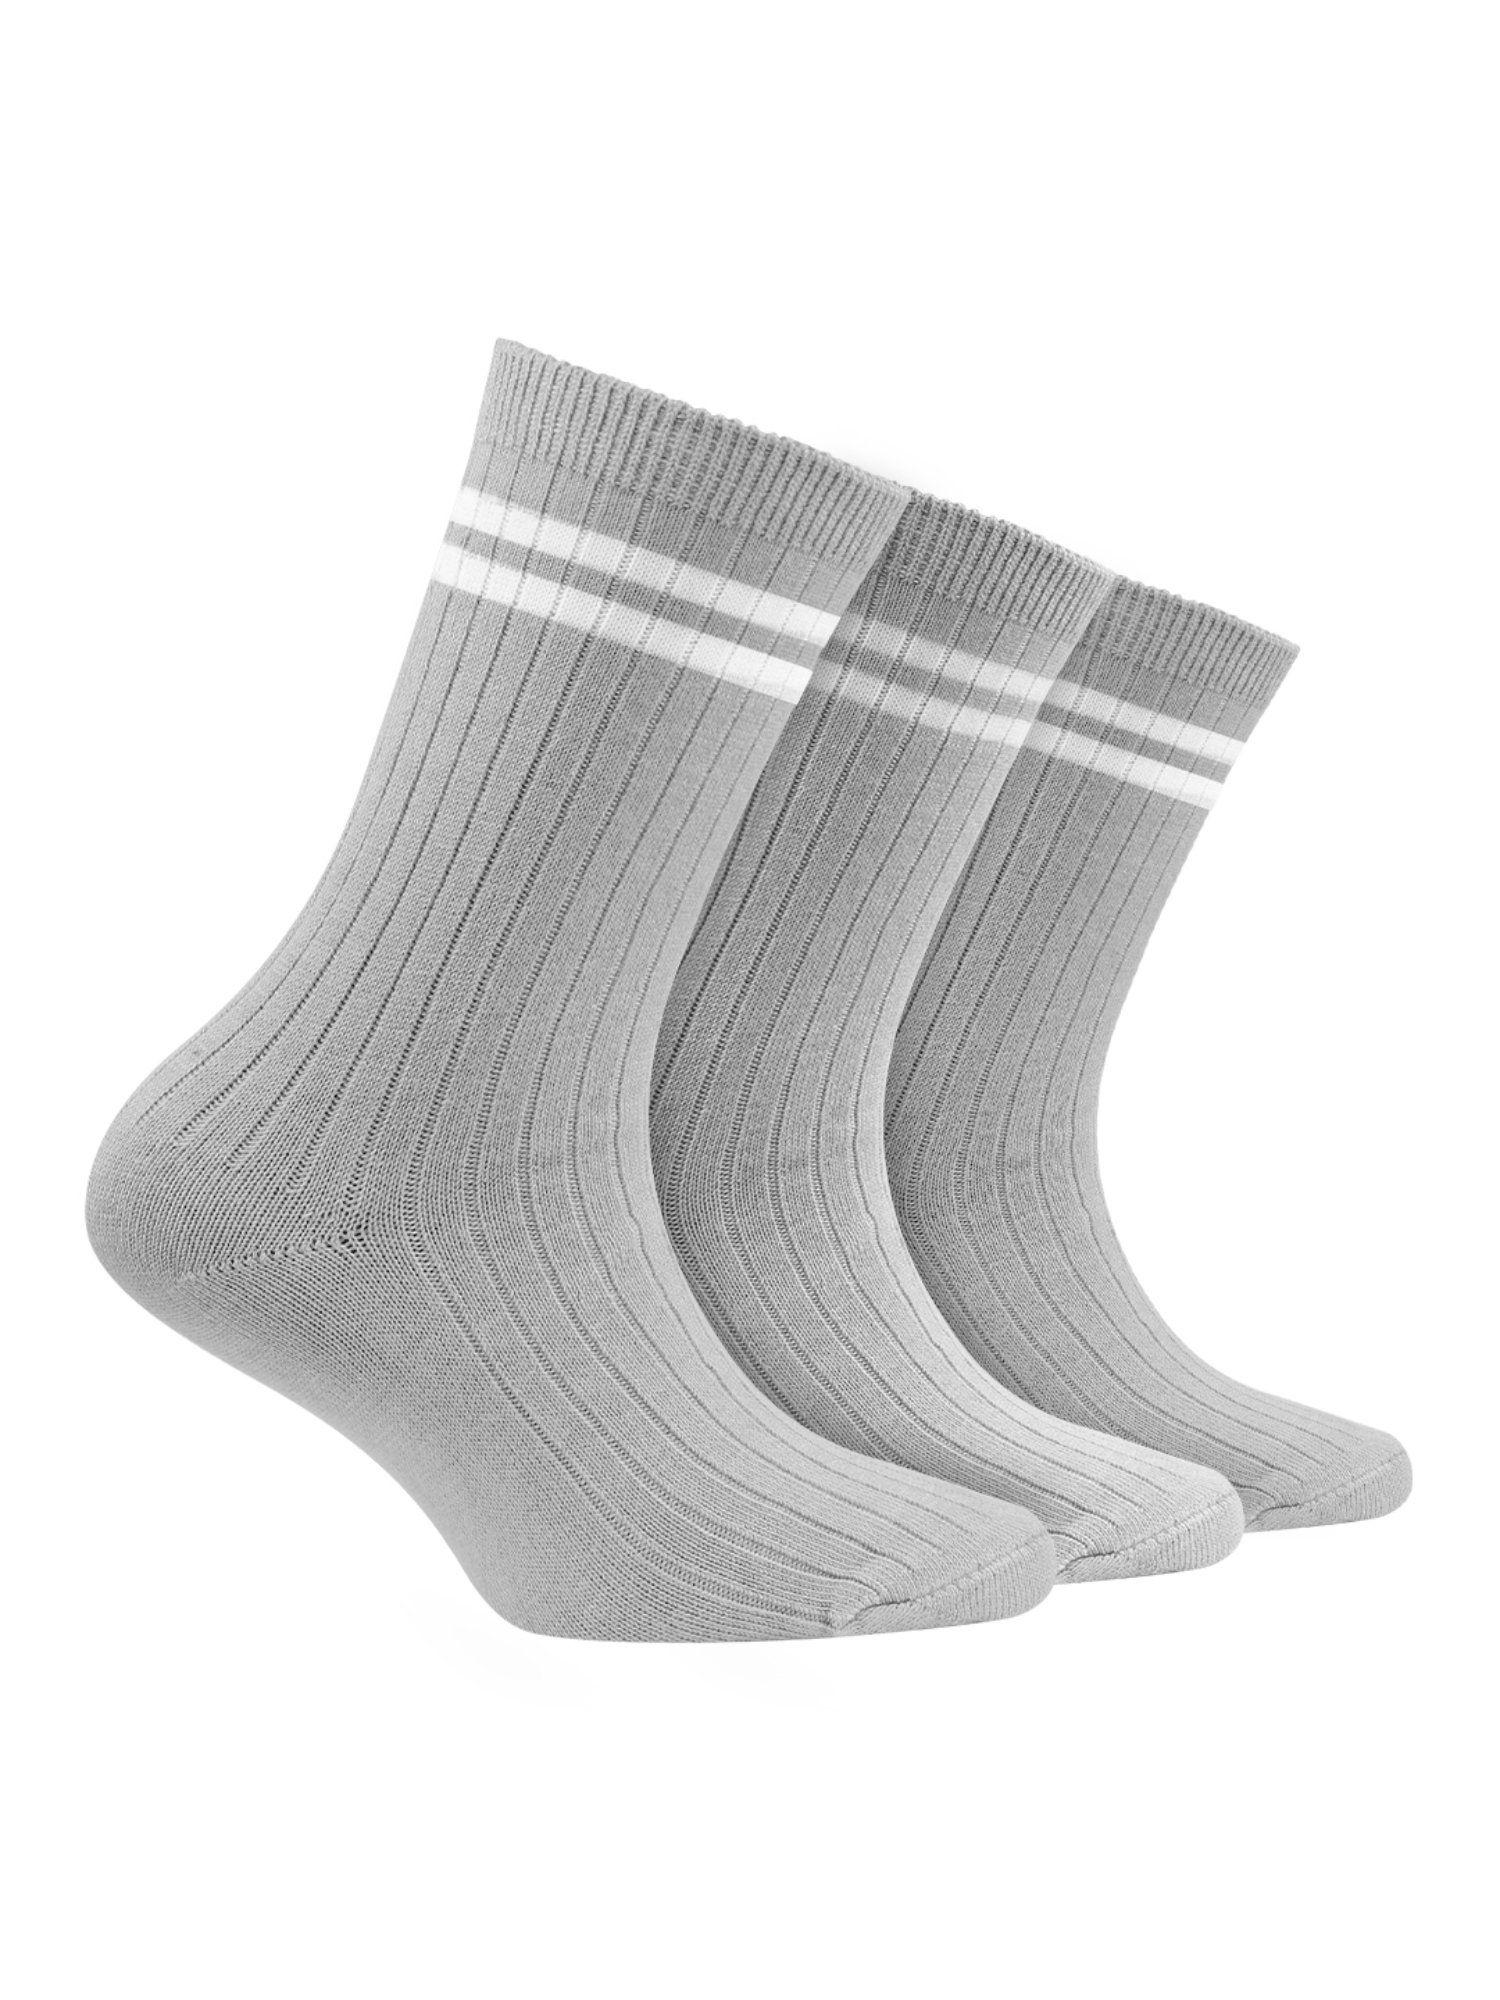 grey-oduor-free-organic-cotton-bamboo-kids-ribbed-socks-pack-of-3